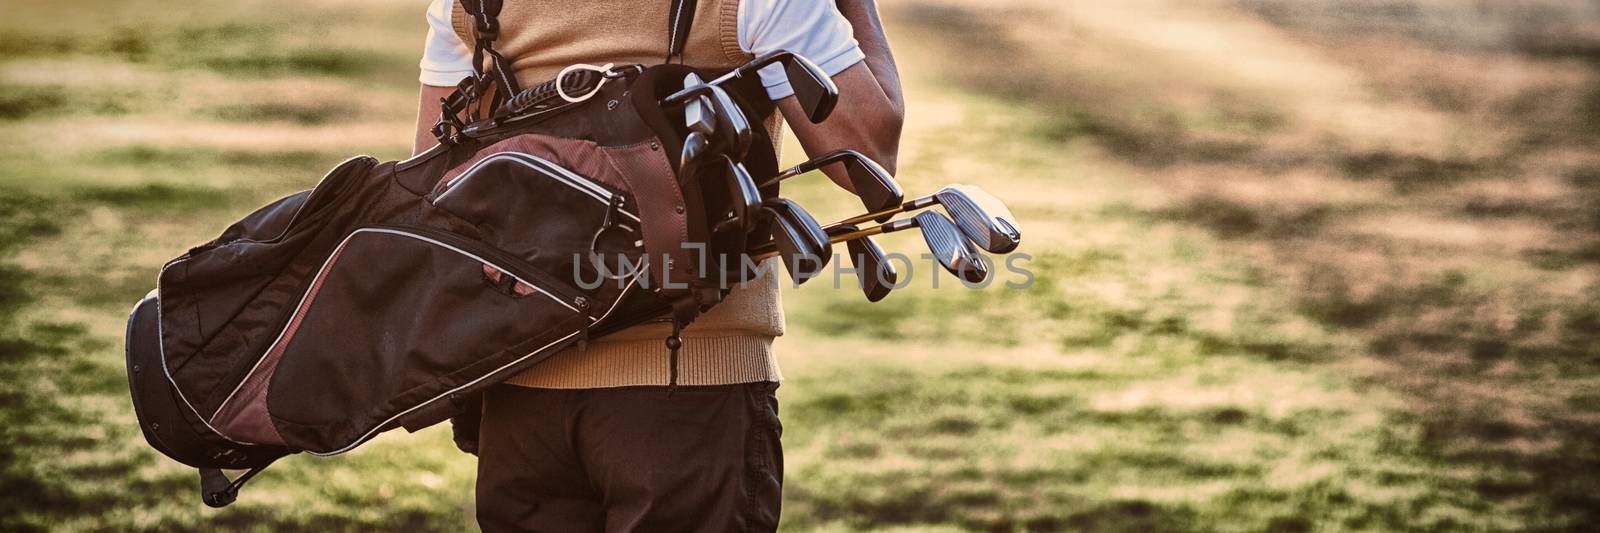 Man carrying golf bag while standing on field by Wavebreakmedia